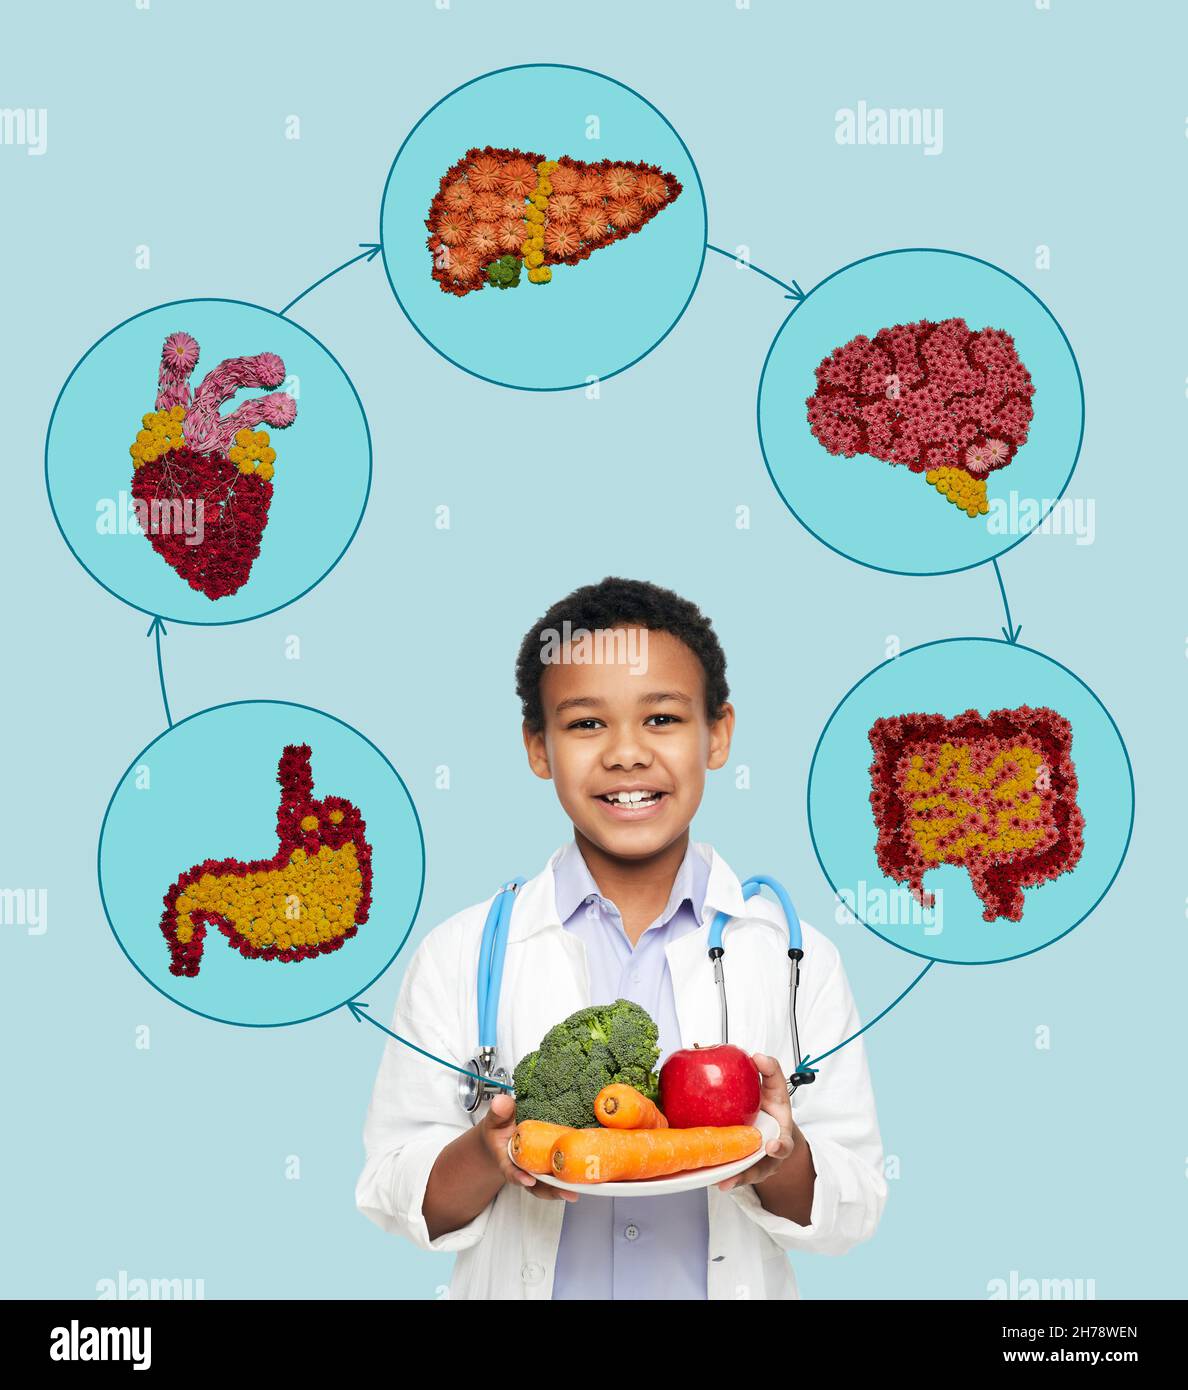 Children healthy nutrition concept. African American boy wearing doctor's uniform with healthy vegetables and fruits recommends natural food for child Stock Photo